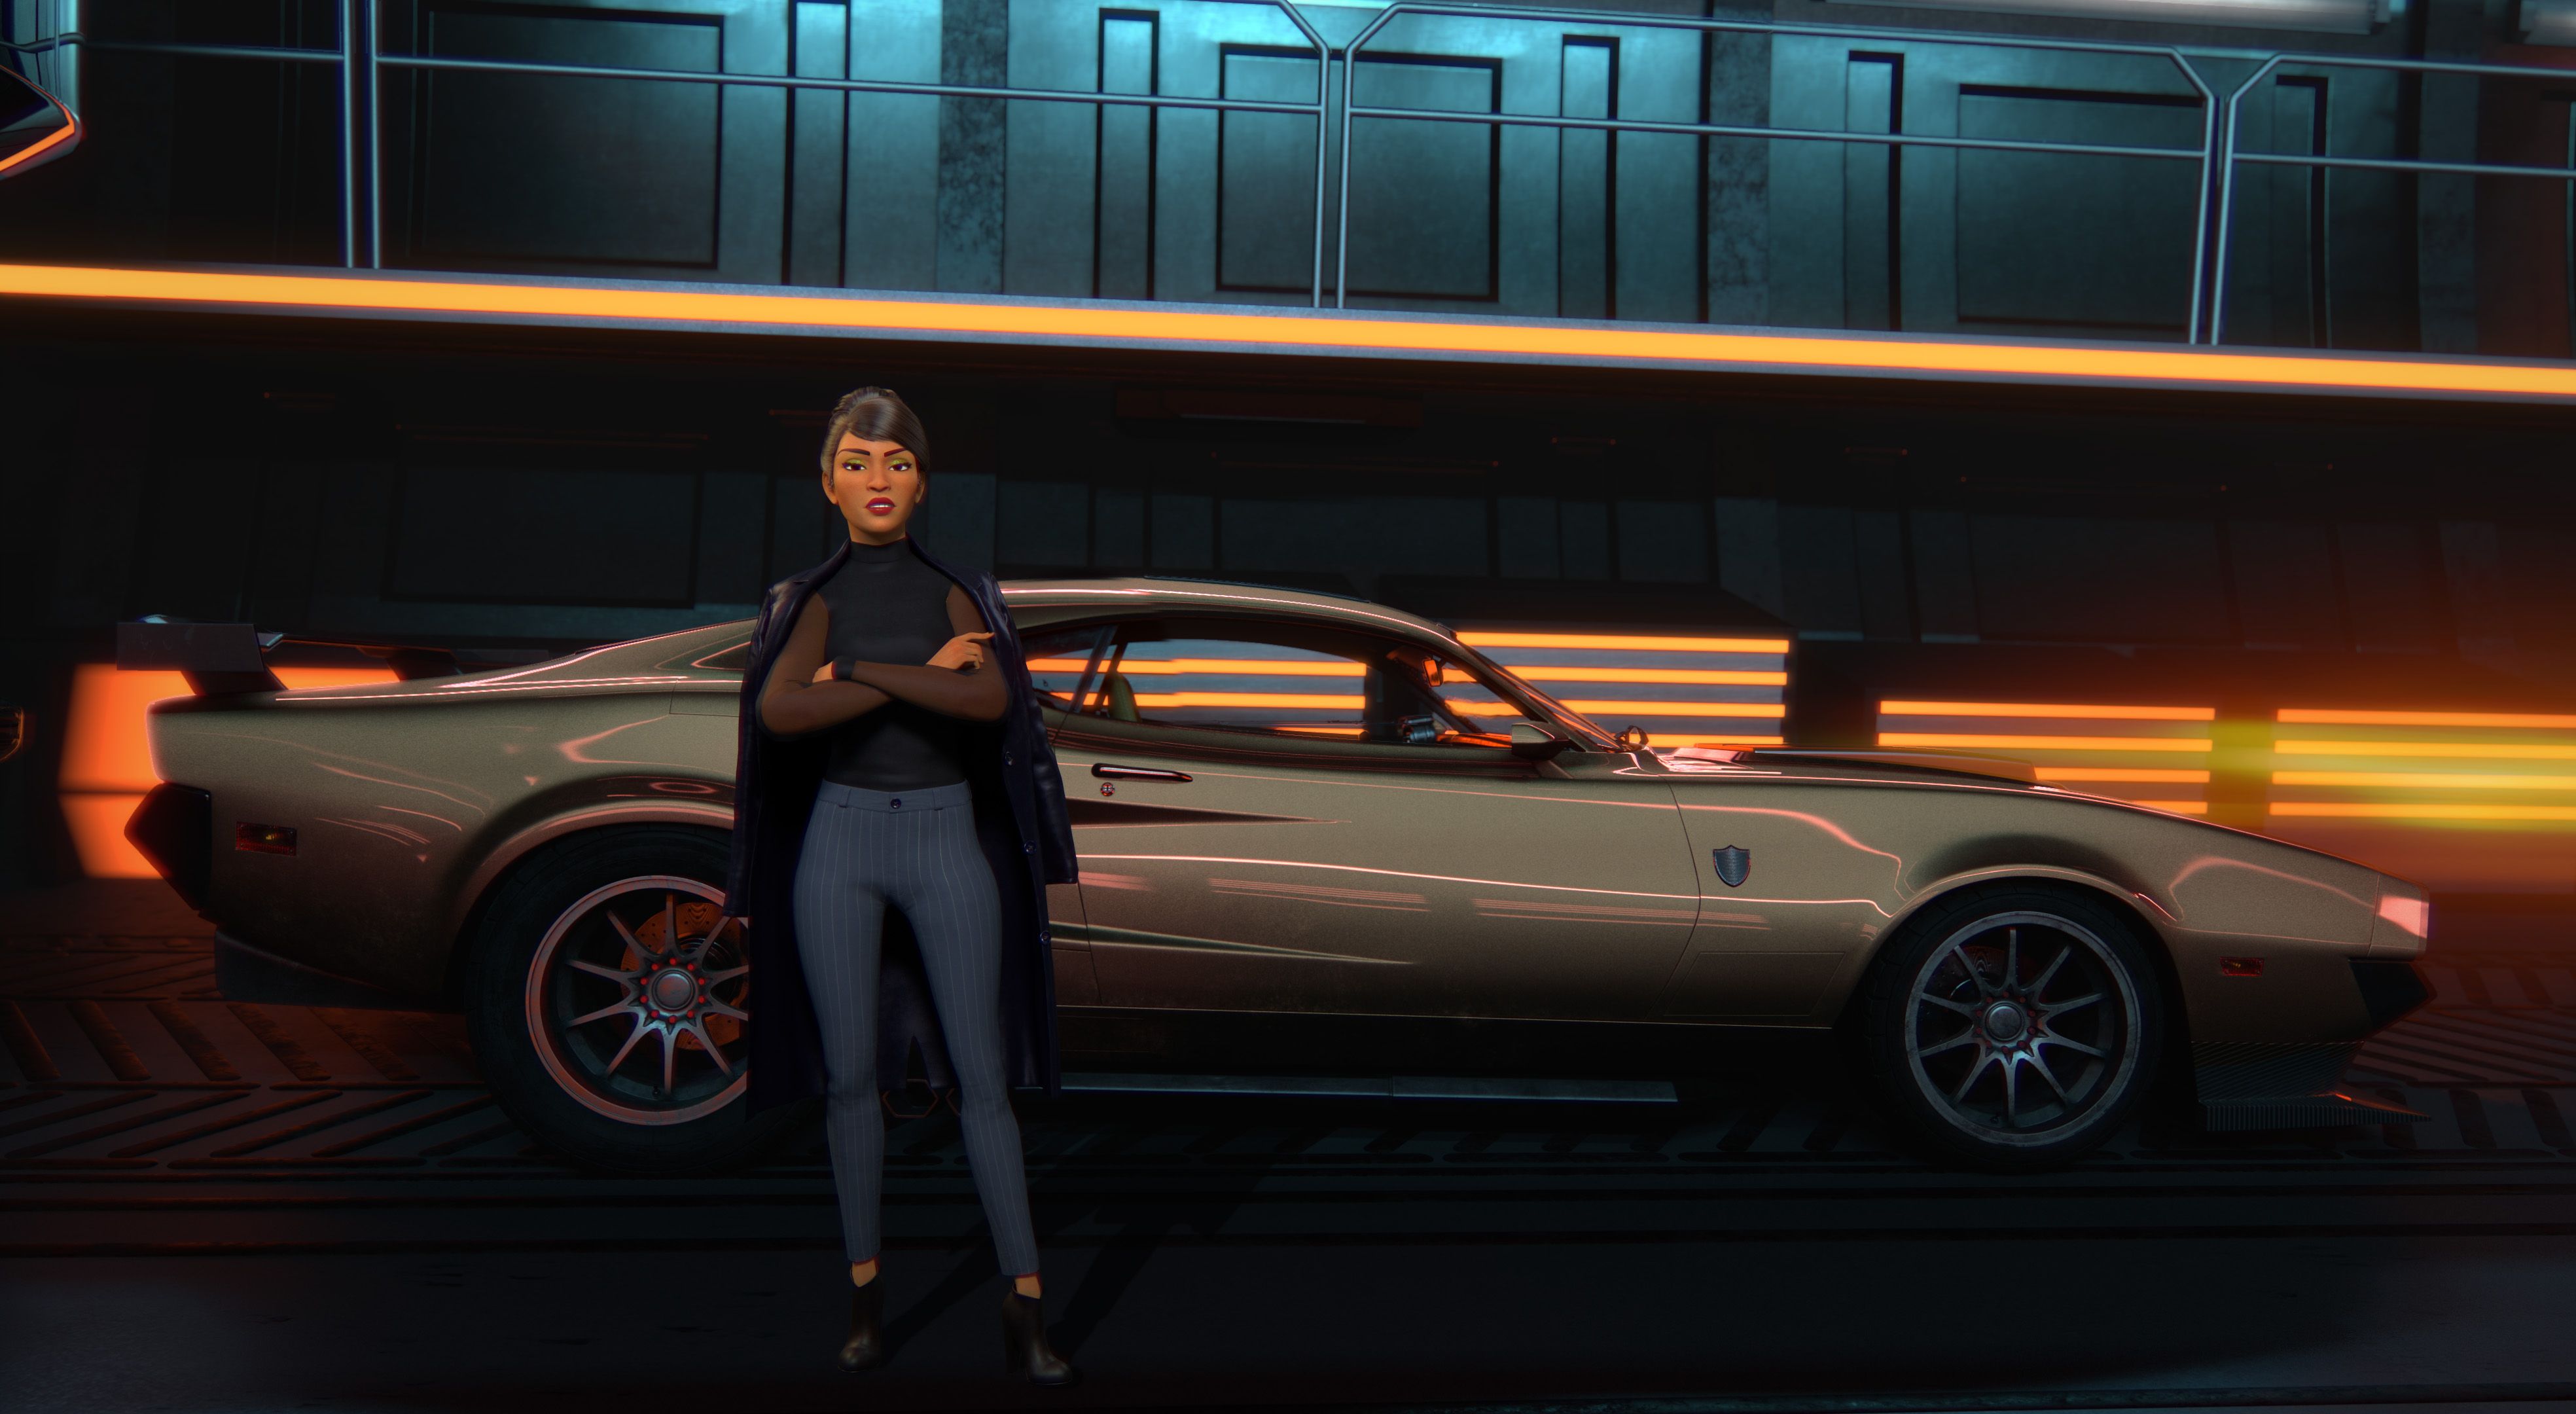 Ms Nowhere poses in front of her car in Fast and Furious Spy Racers season 2 Ms. Nowhere